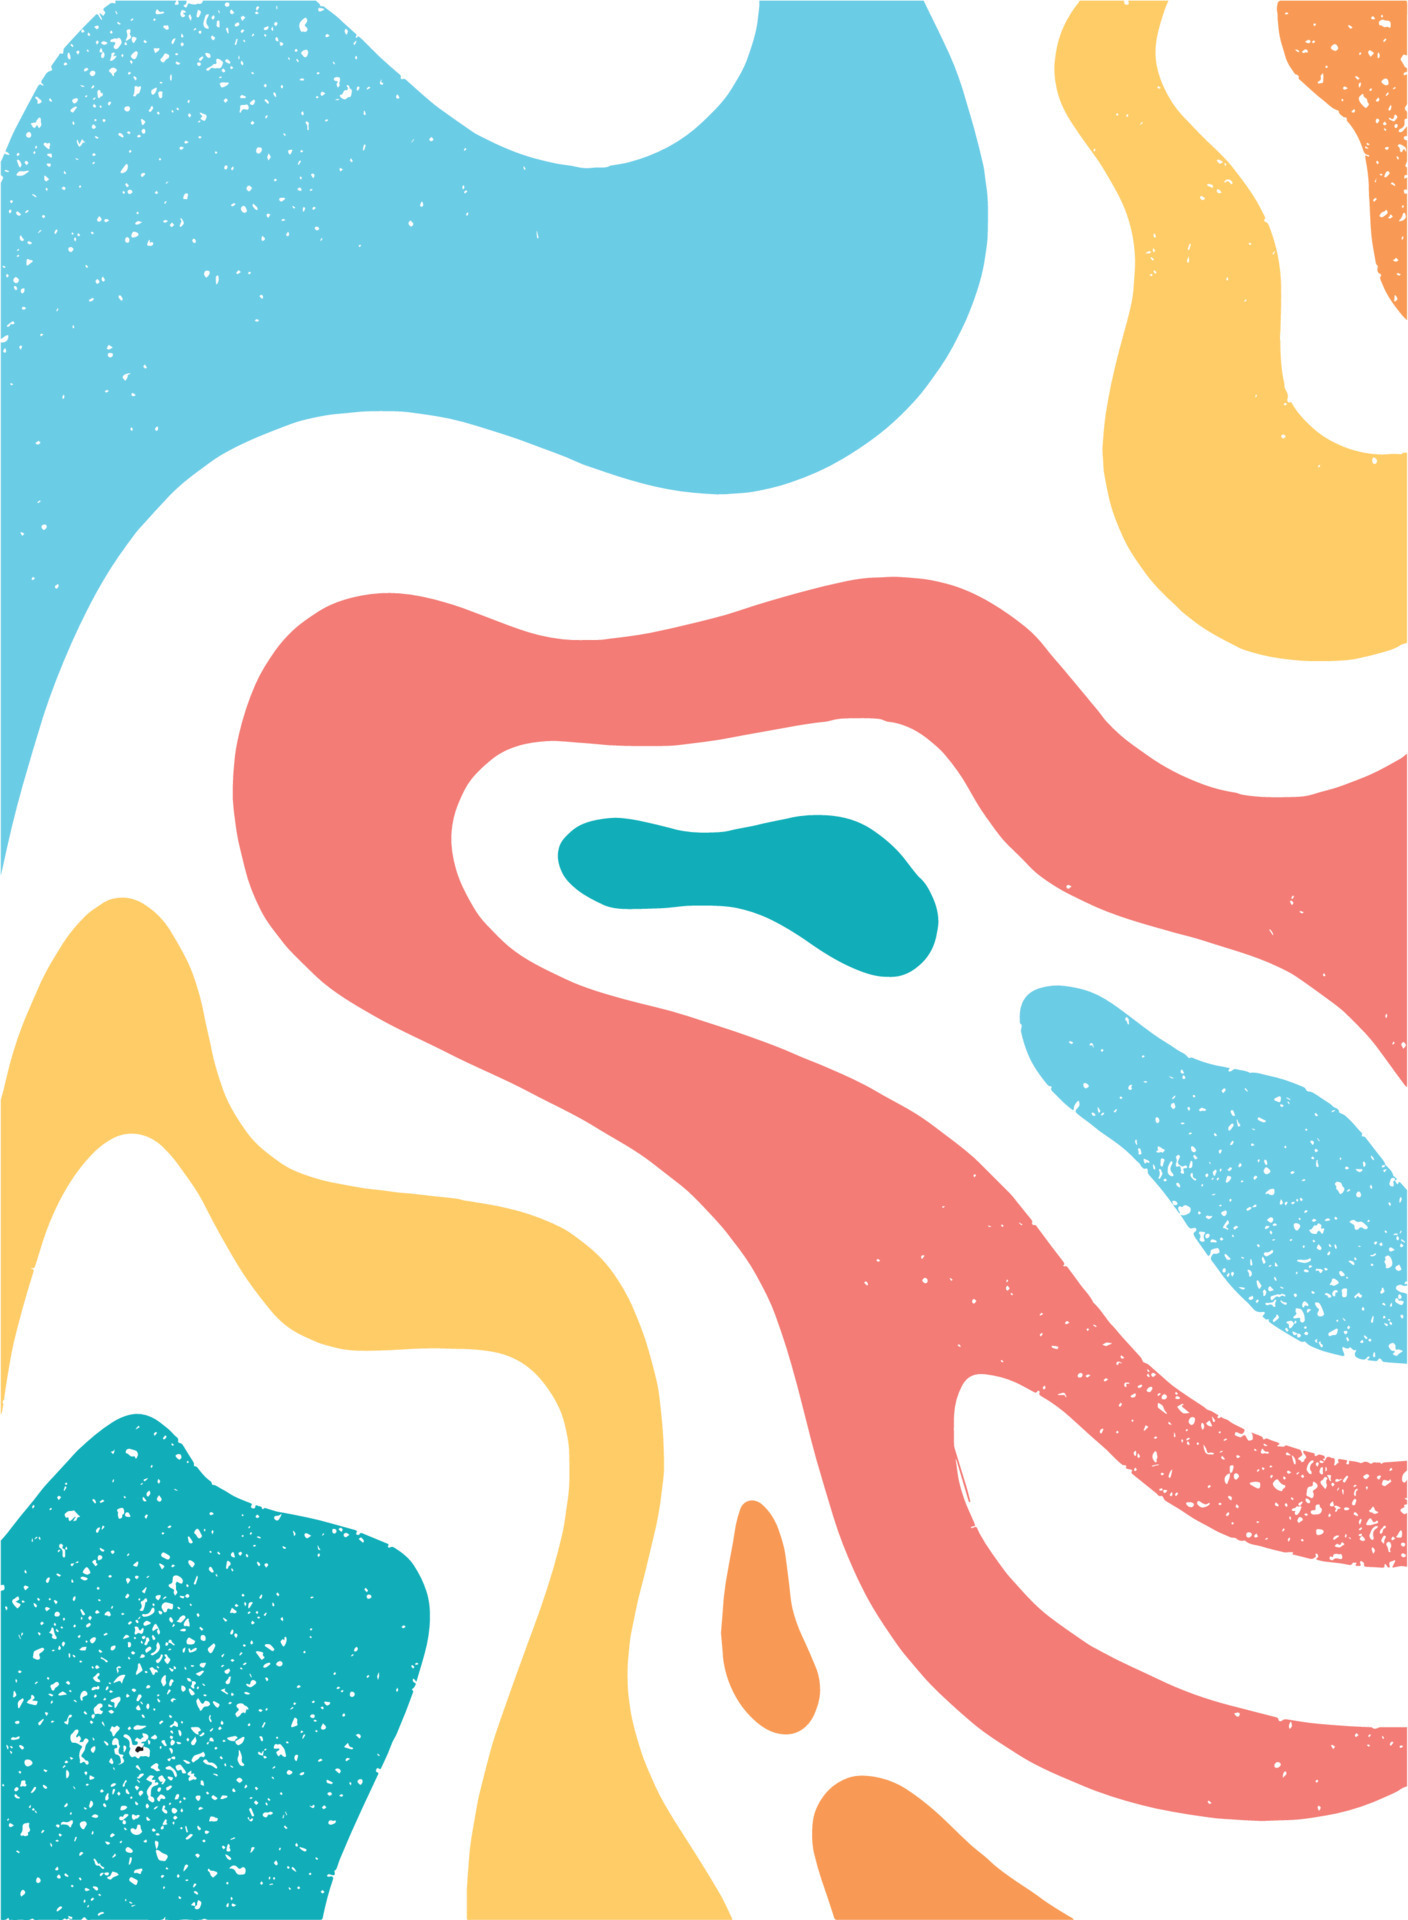 hente Subjektiv Falde sammen Groovy wallpaper, print, background with abstract shapes and wavy stripes.  Good for funky and retro social media templates, covers, cards, posters,  banners, etc. EPS 10 21515463 Vector Art at Vecteezy